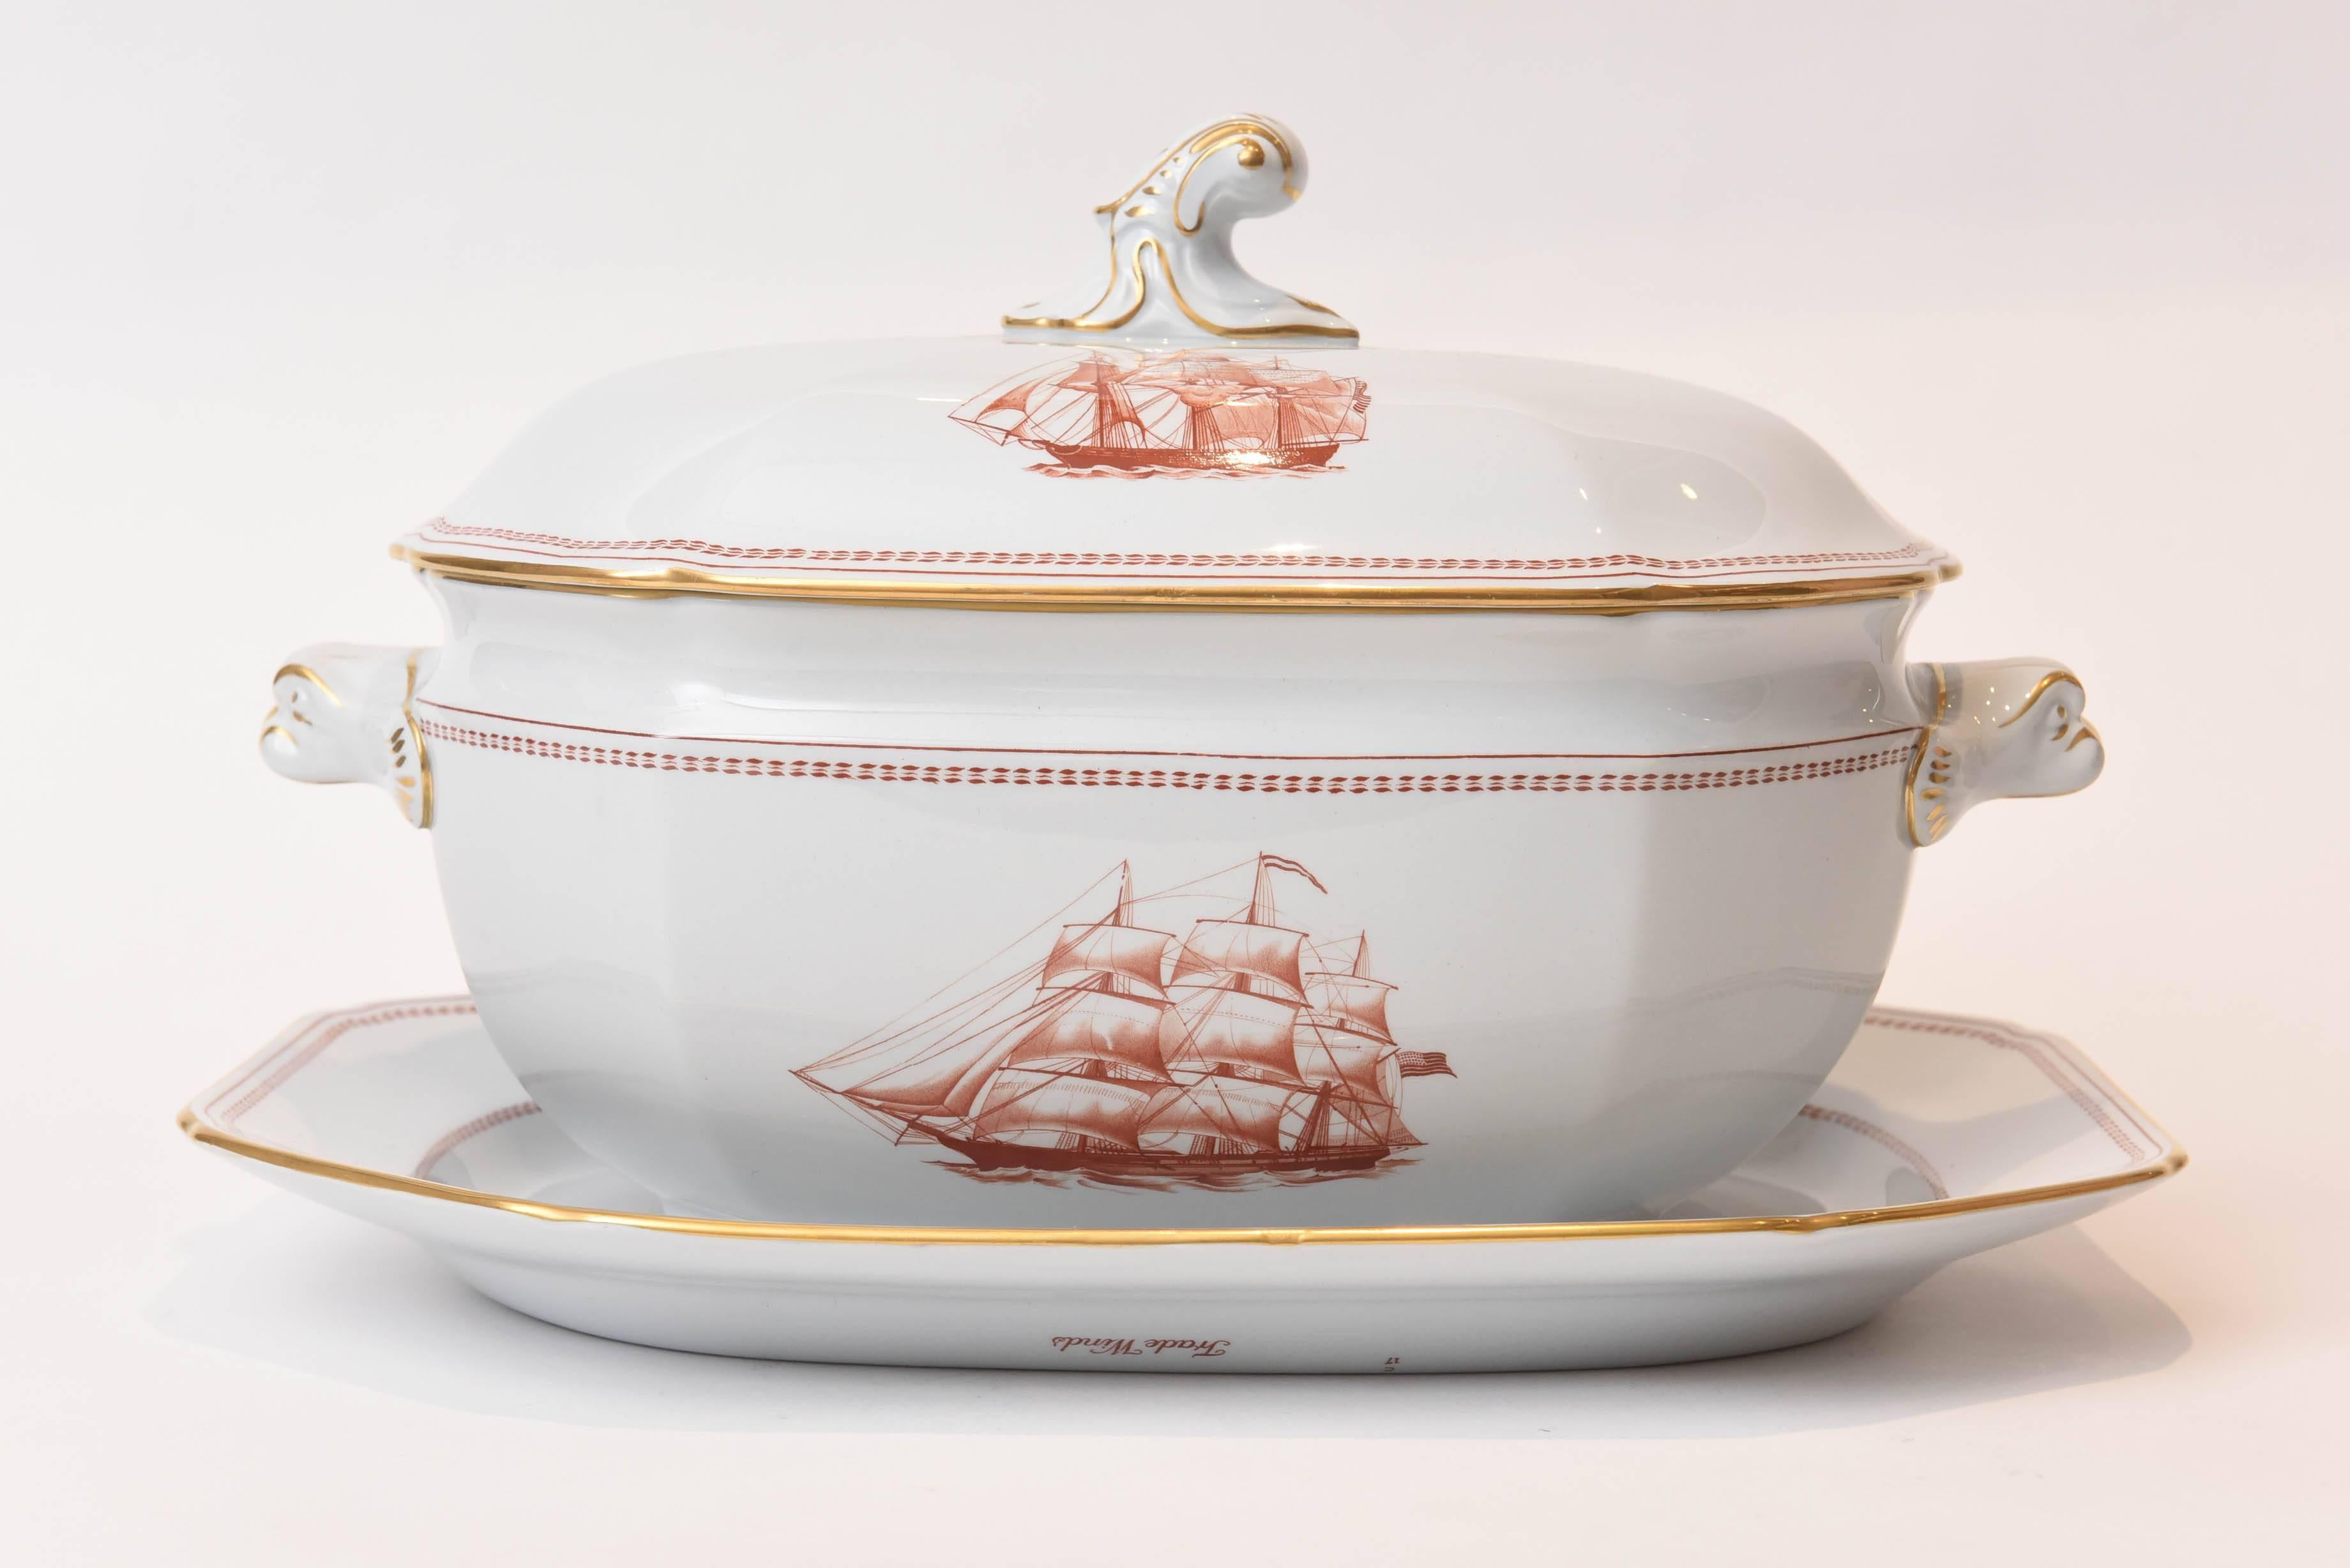 An impressive serving piece (three-part set with tureen, lid and platter) in the hard to find Tradewinds Red featuring a Chinese Export inspired pattern with Foo dog handles. Trimmed in 24-karat gold and made from Spode's blue grey porcelain known